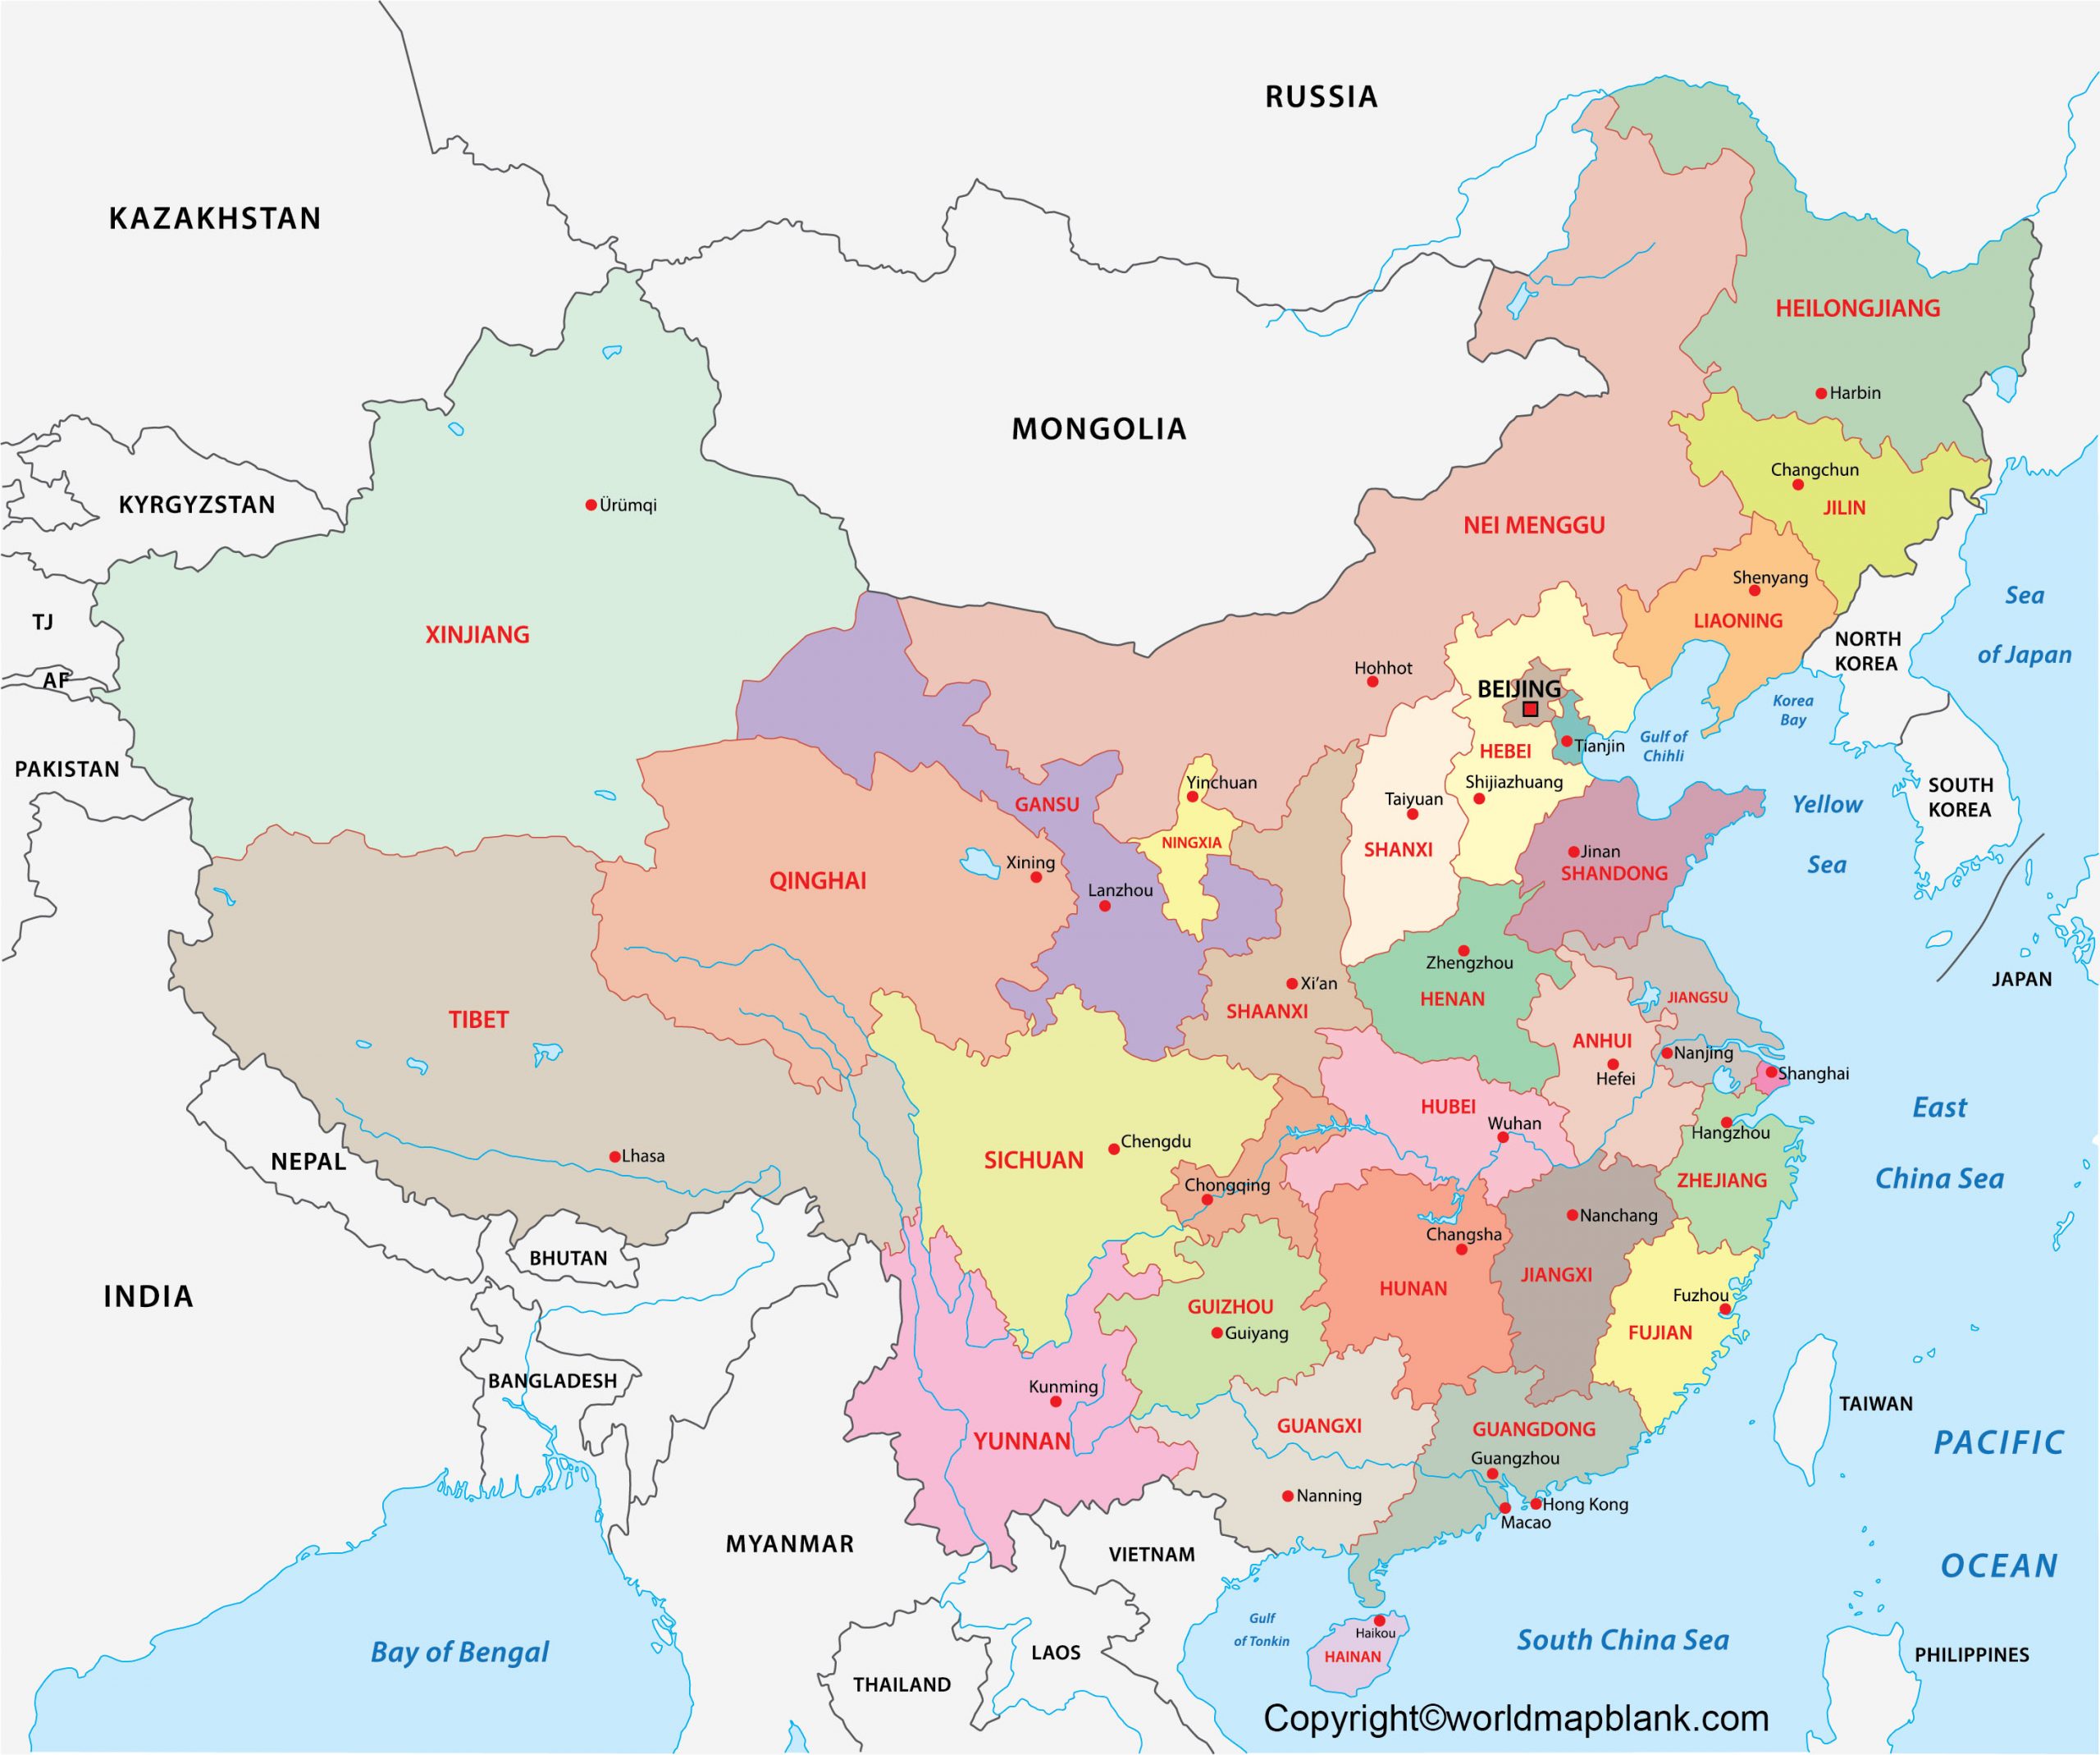 Labeled Map of China with Provinces